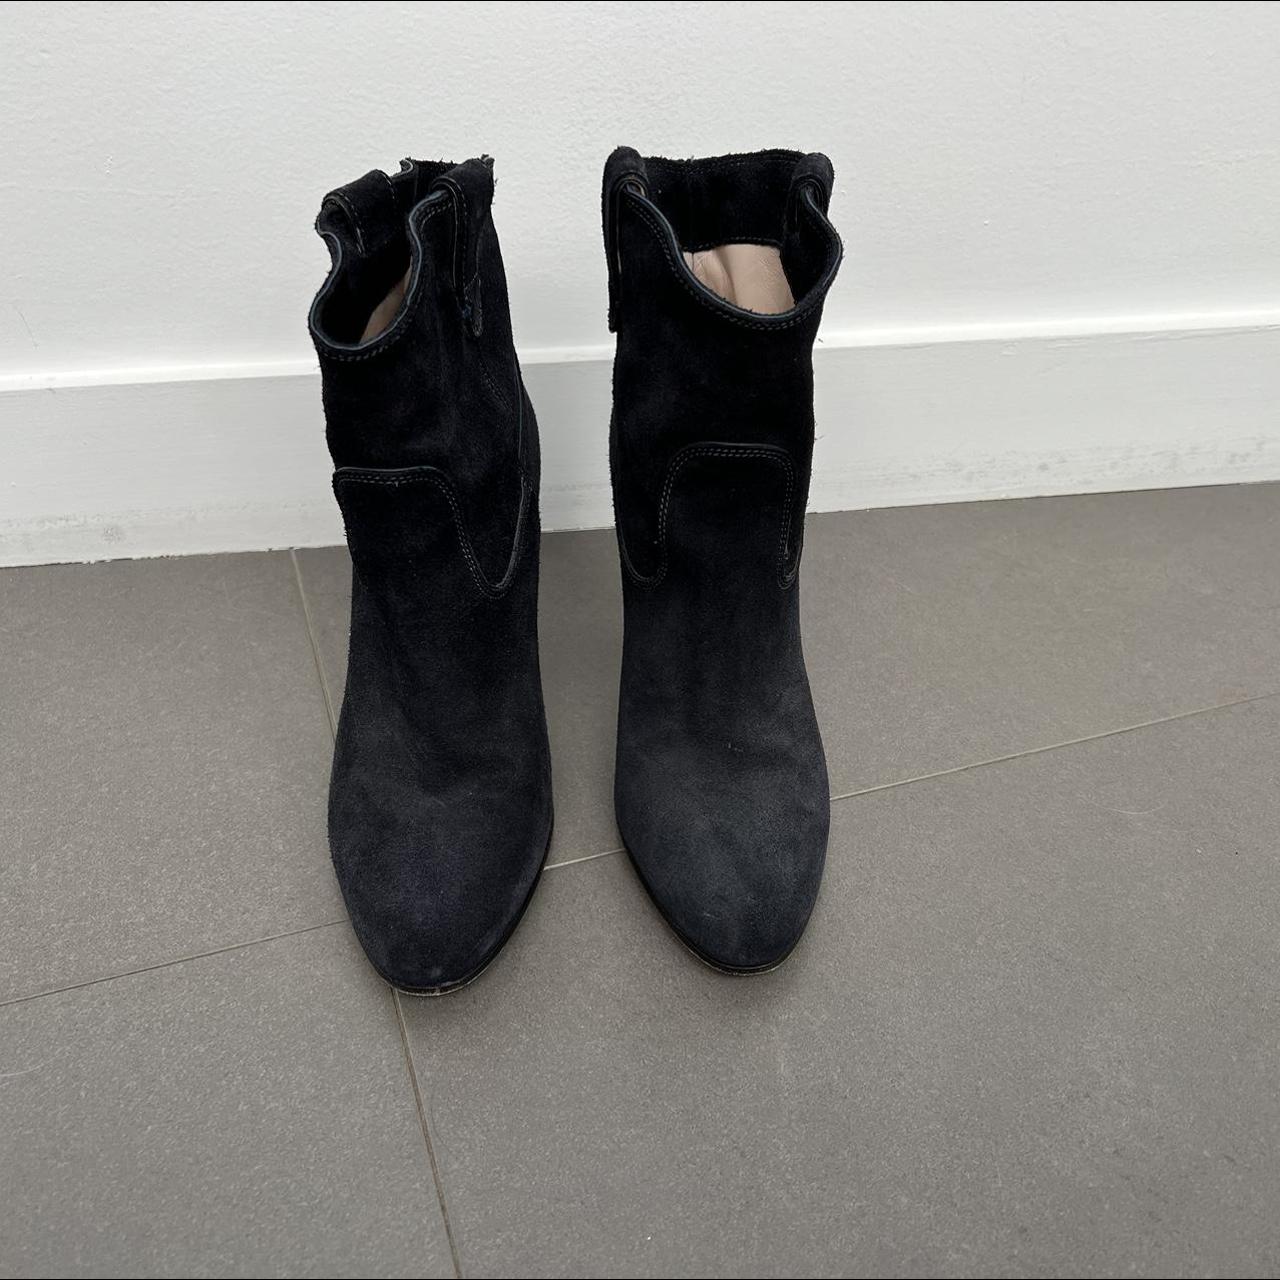 SCOOP slouch boots. Size 7.5. Beautiful navy suede....